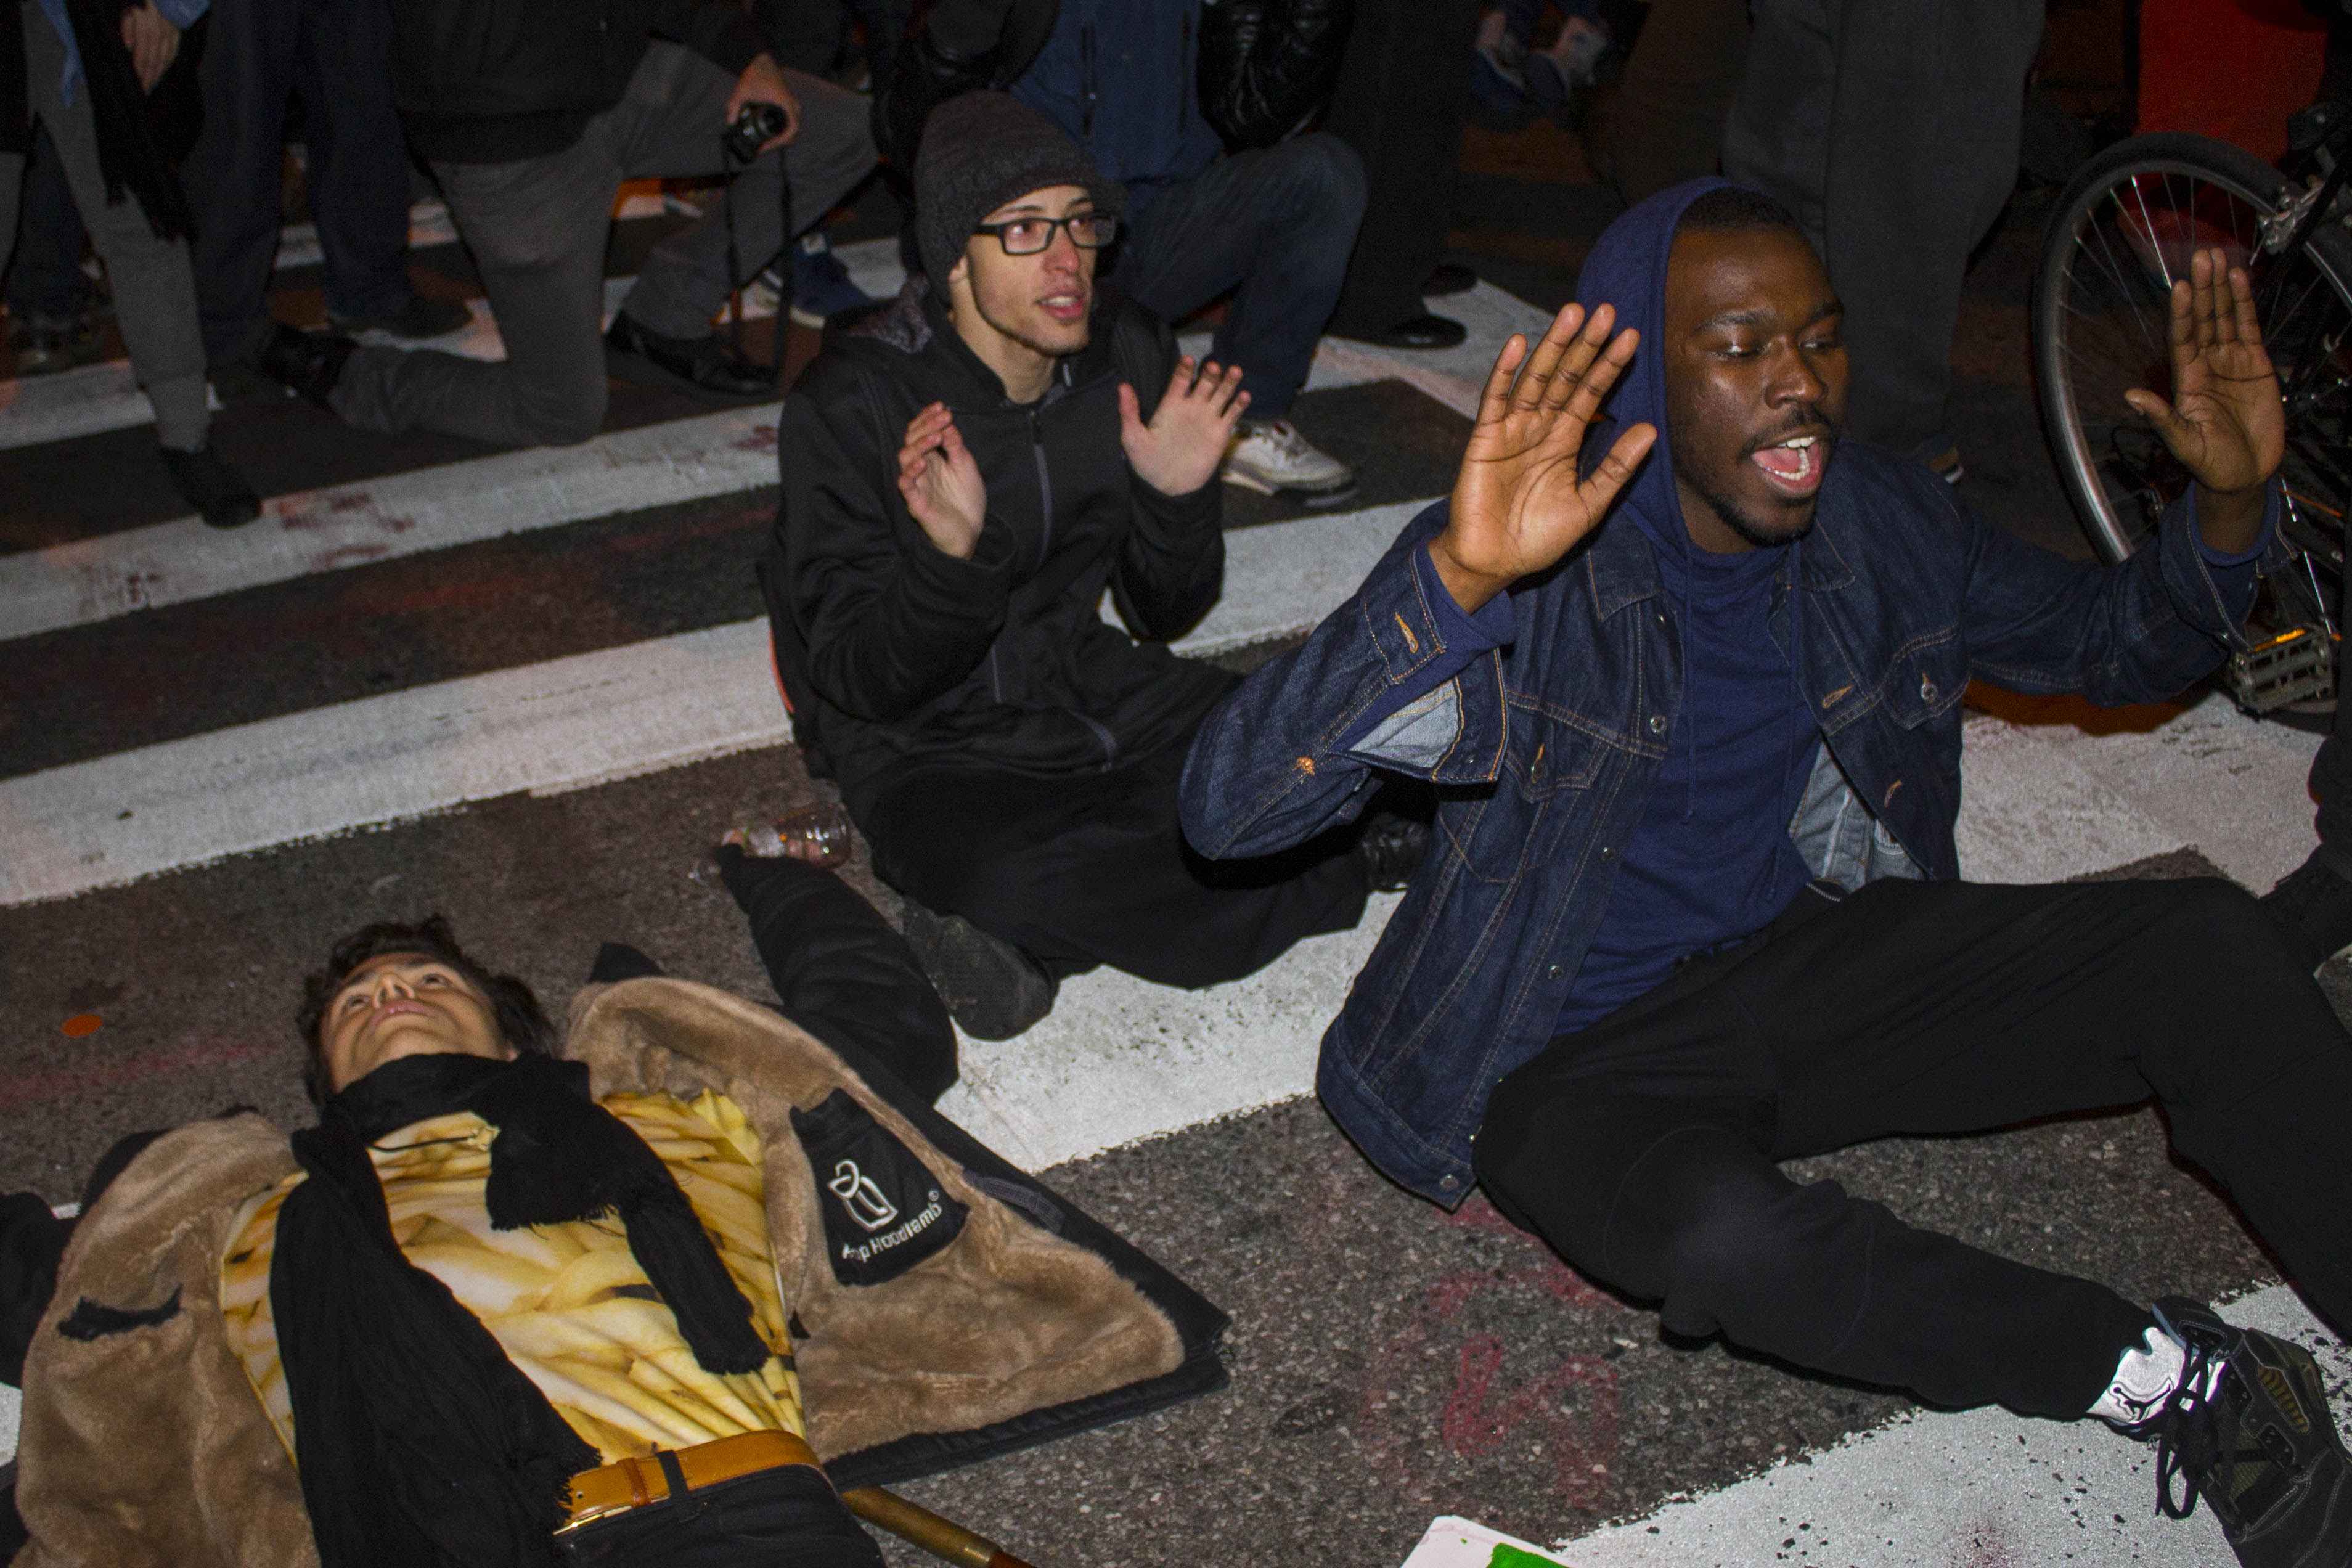 Demonstrators staged “die-ins” throughout the march, including at the intersection of W. 28th St. and Seventh Ave. shortly after 11 p.m.